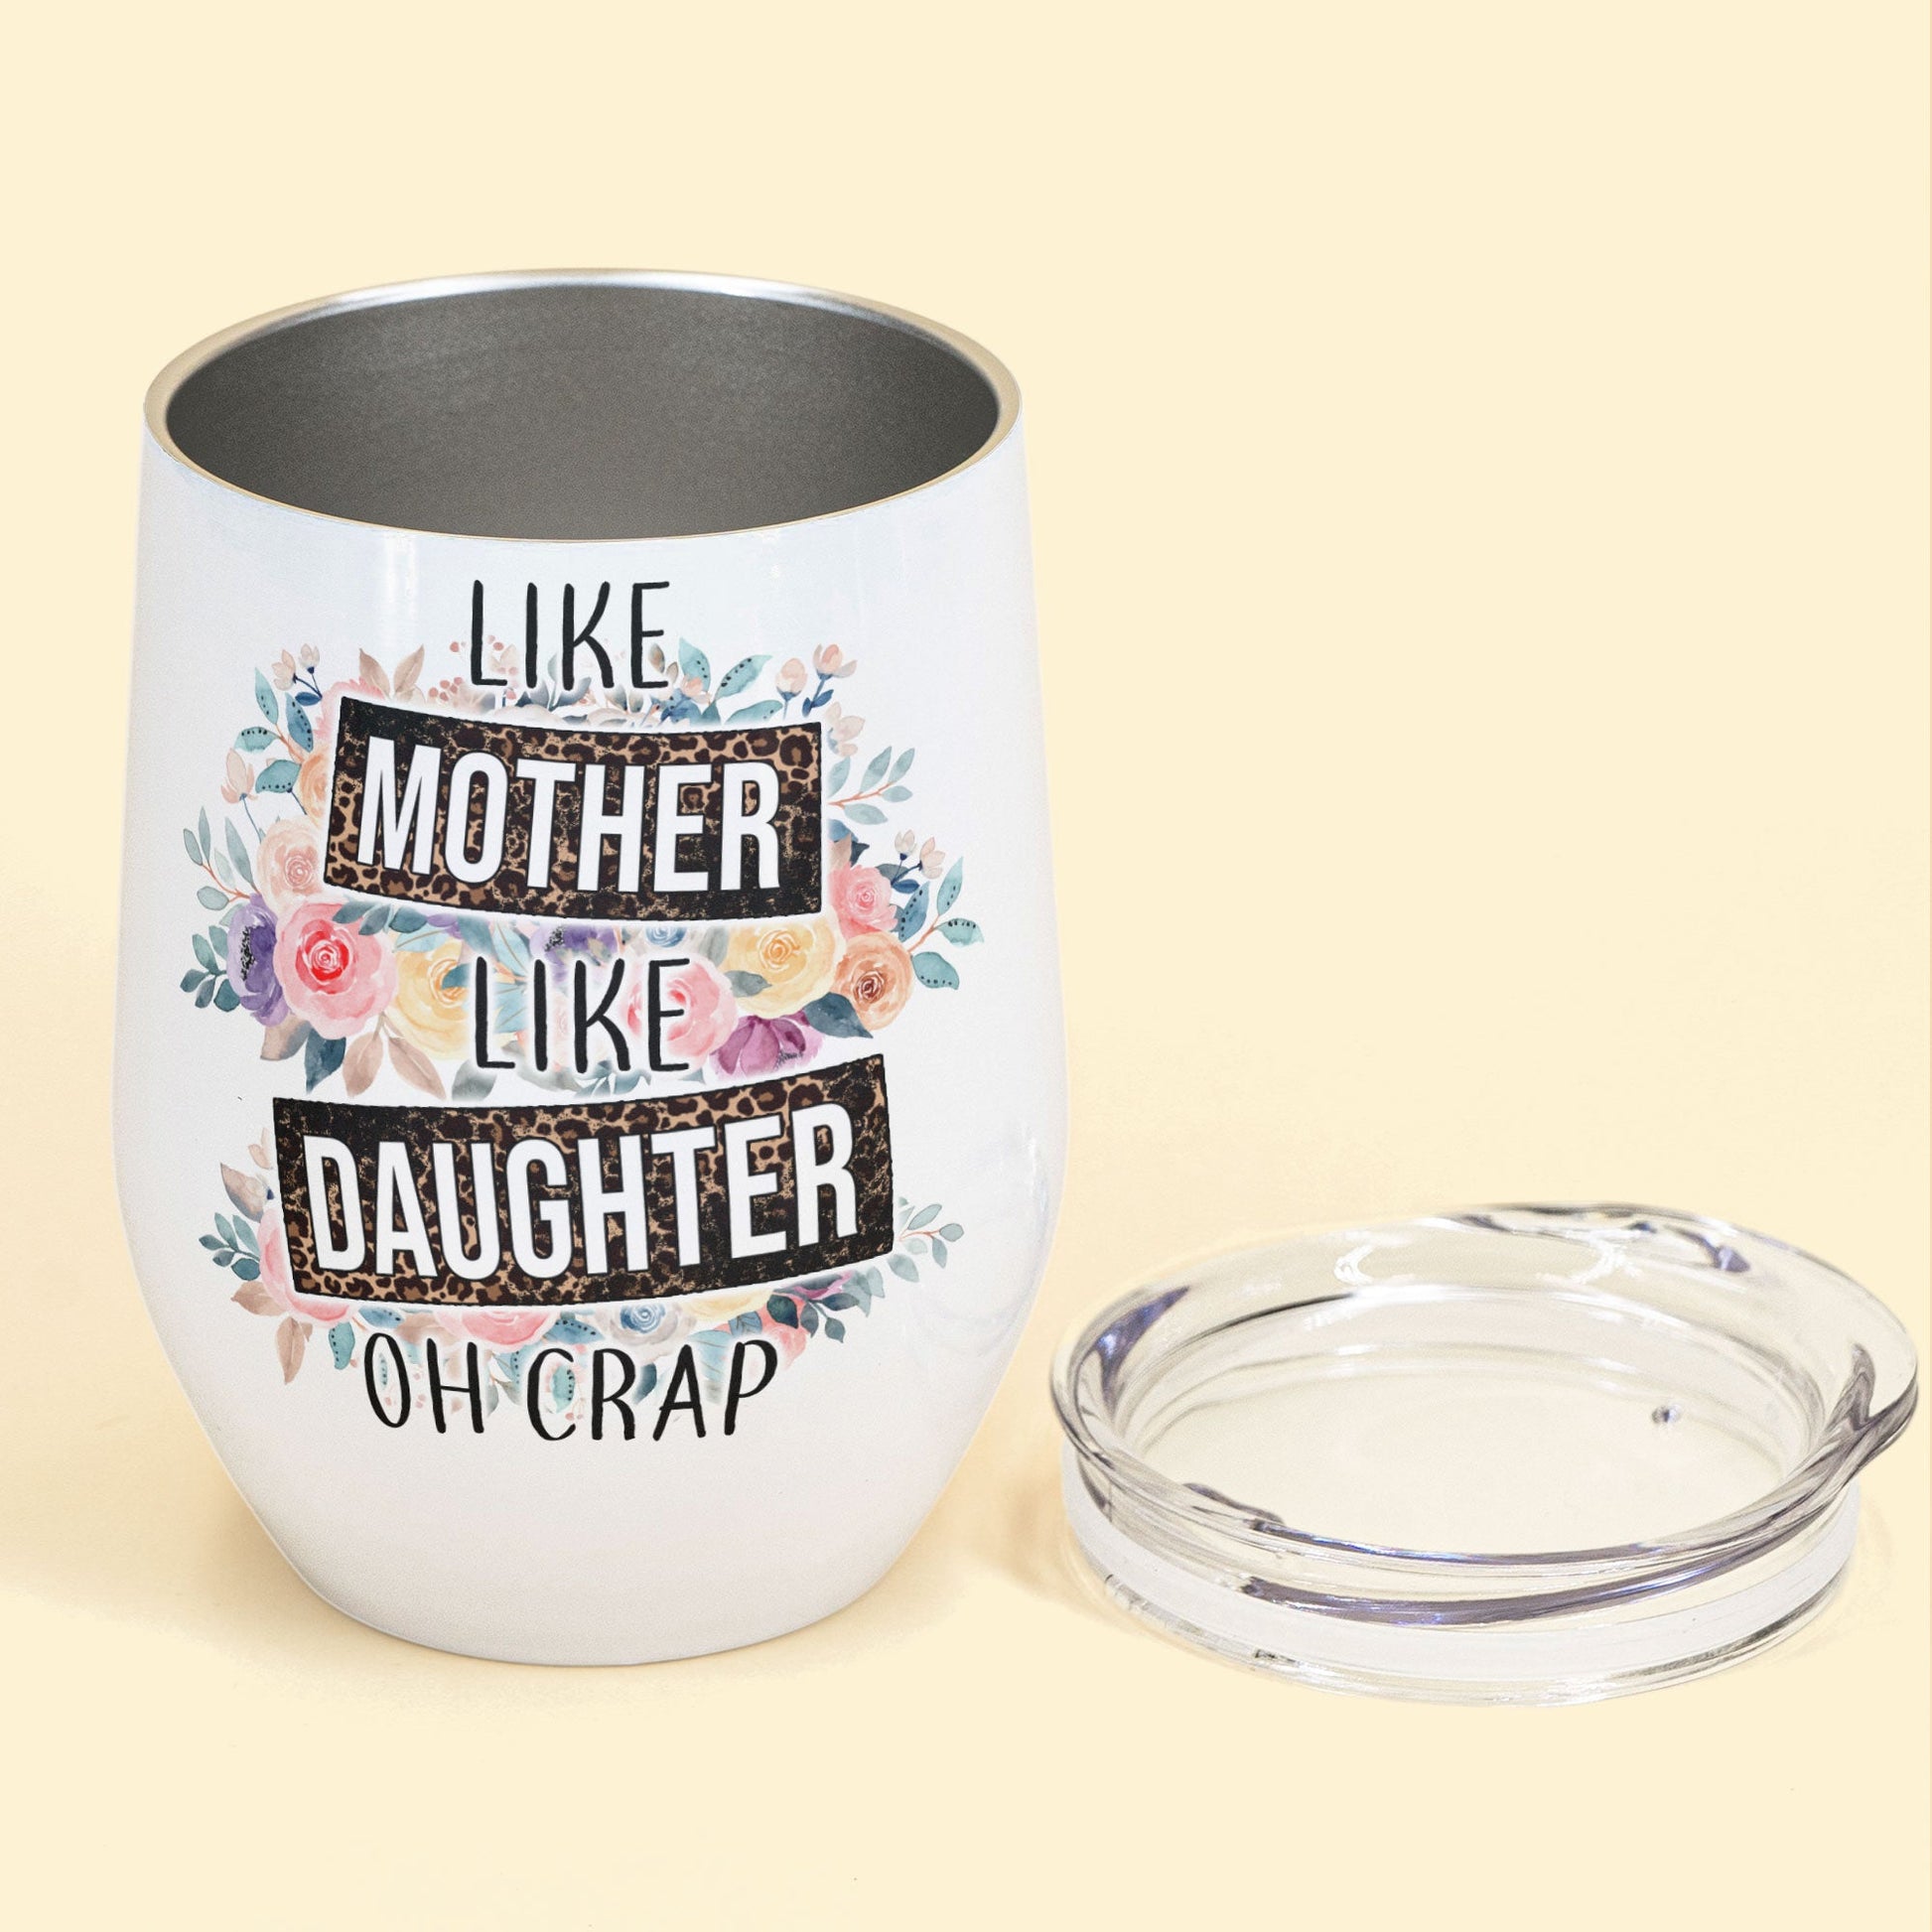 Personalized Mother's Day Gifts - Like Mother Like Daughter Oh Crap - -  Best Custom